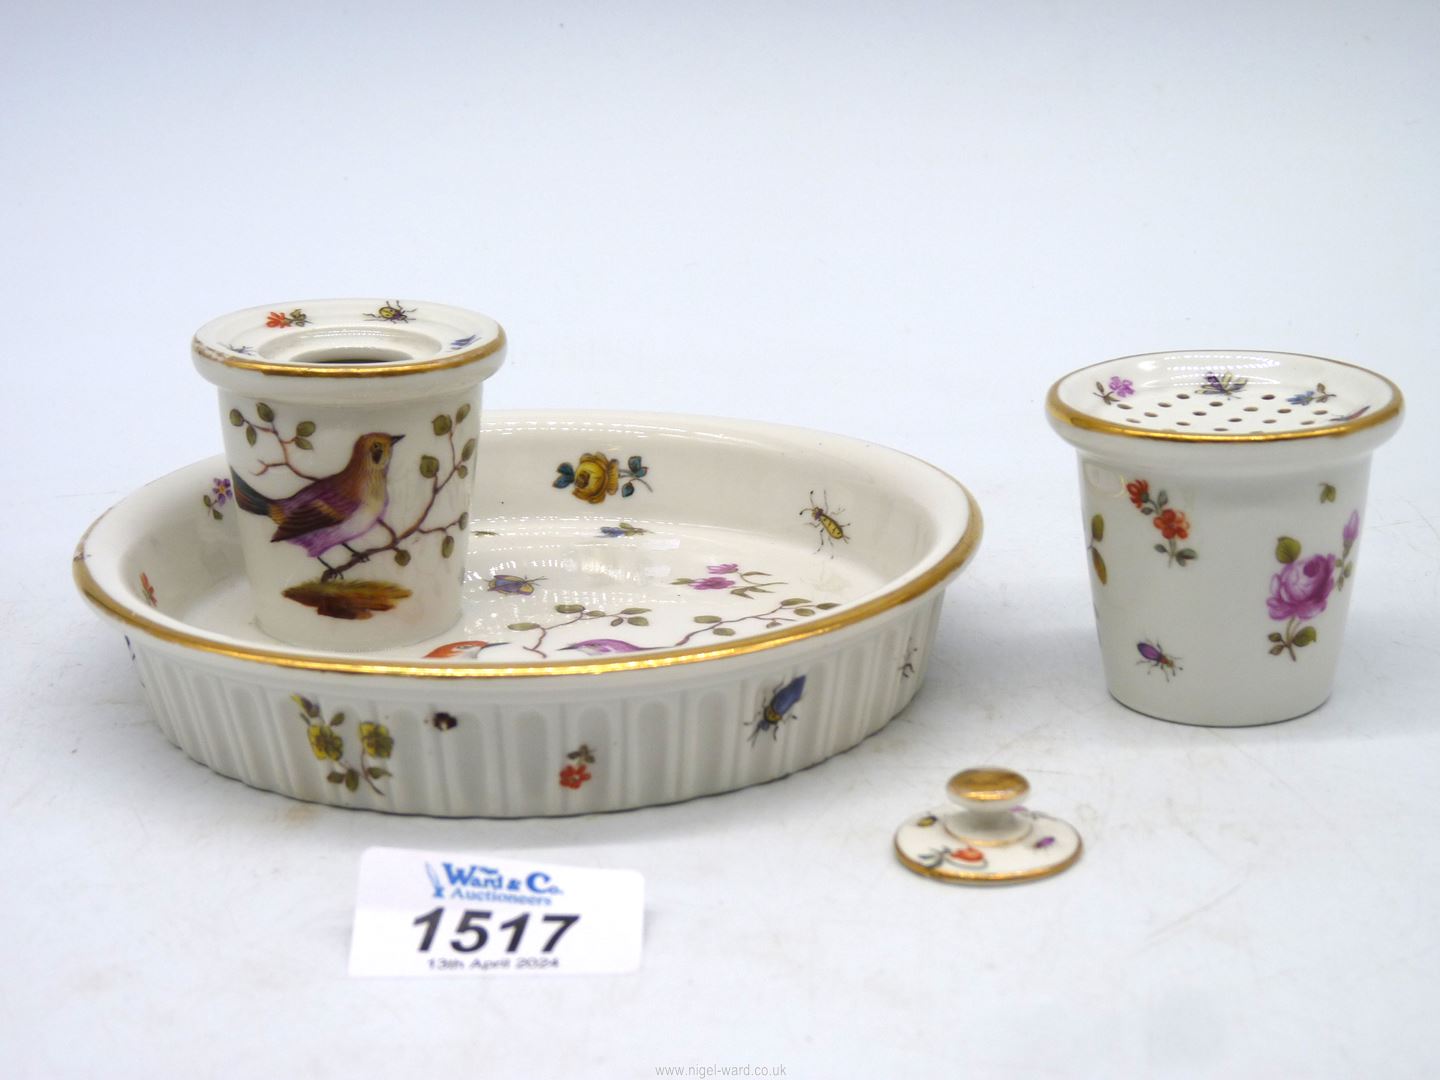 An antique continental porcelain desk set with tray and attached ink well with lid and a sander. - Image 2 of 4